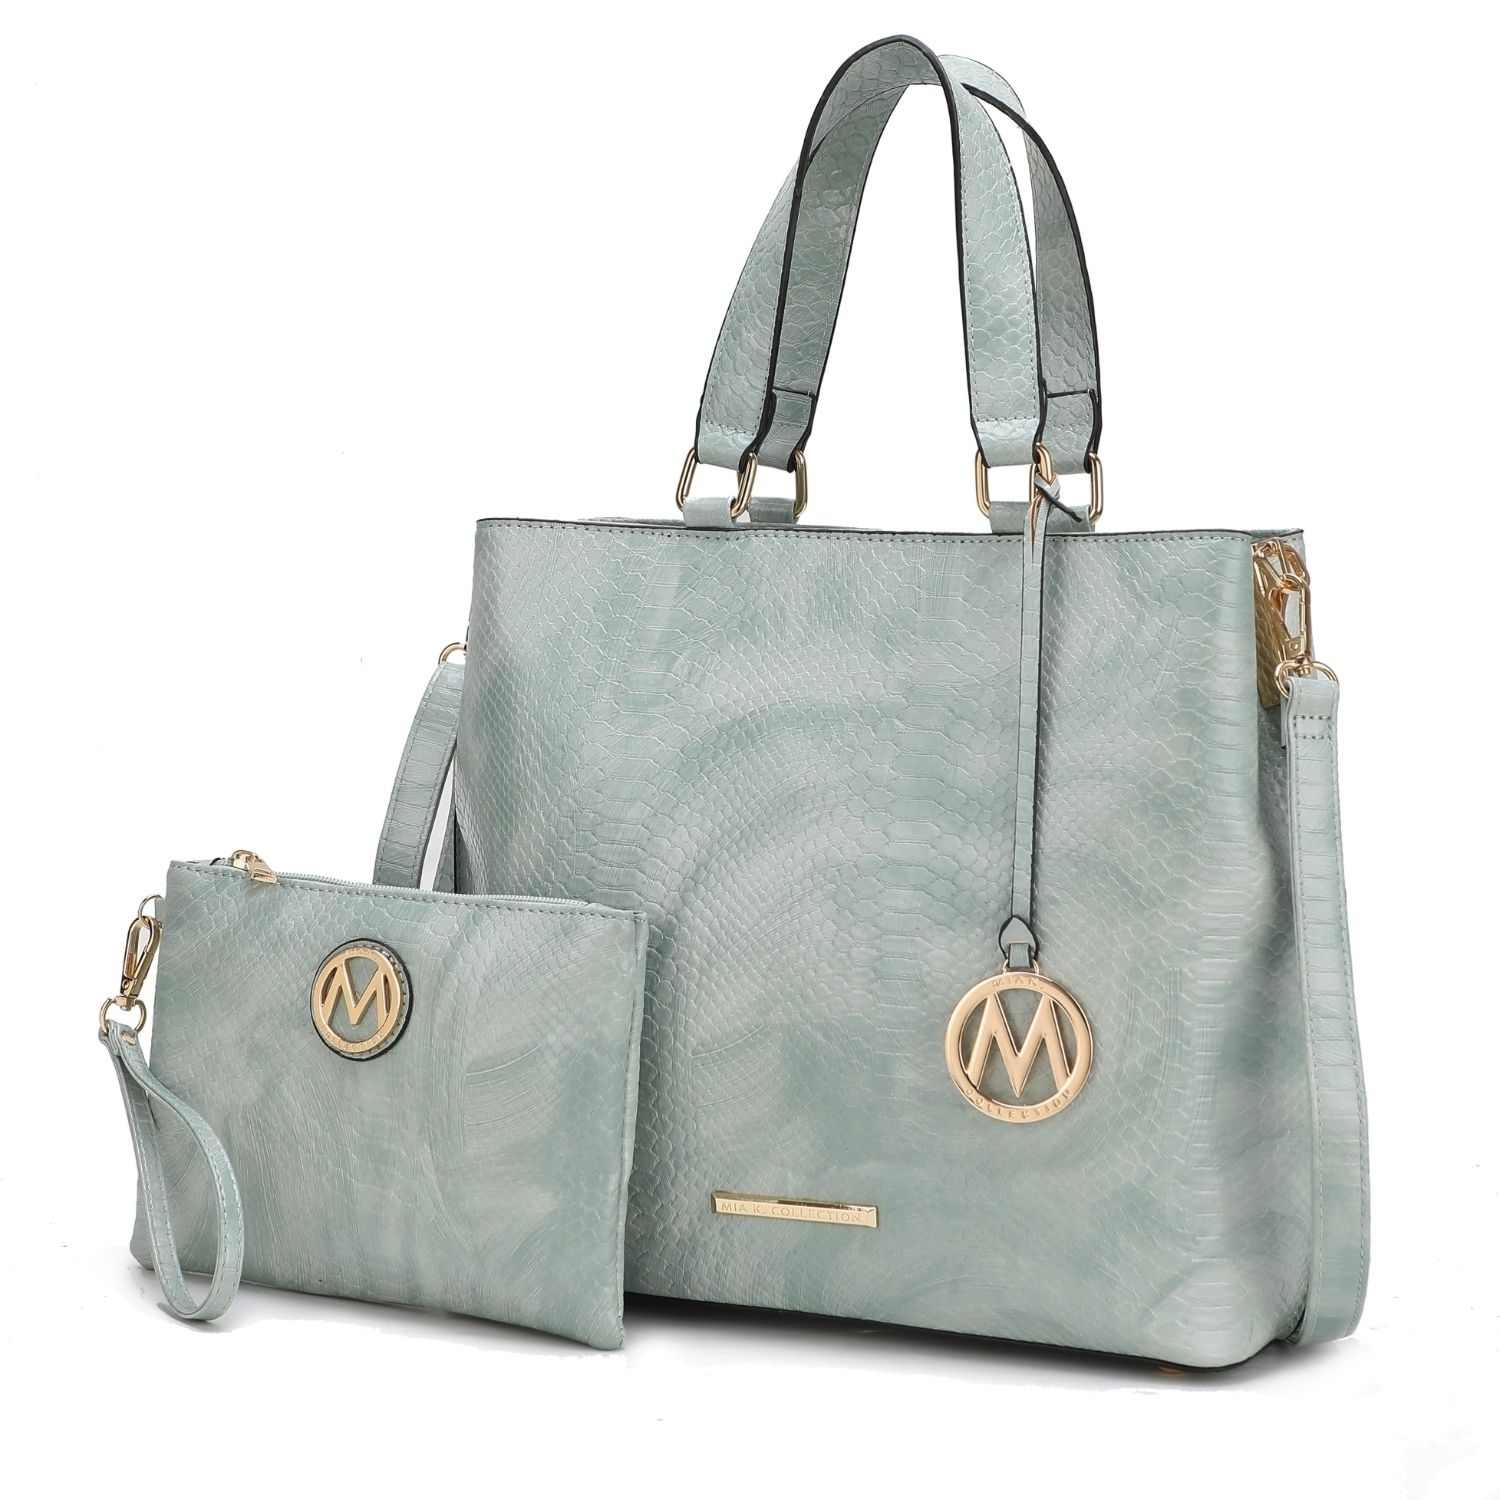 MKF Collection Beryl Snake-embossed Vegan Leather Women's Tote Handbag With Wristlet - 2 Pieces, By Mia K - Seafoam